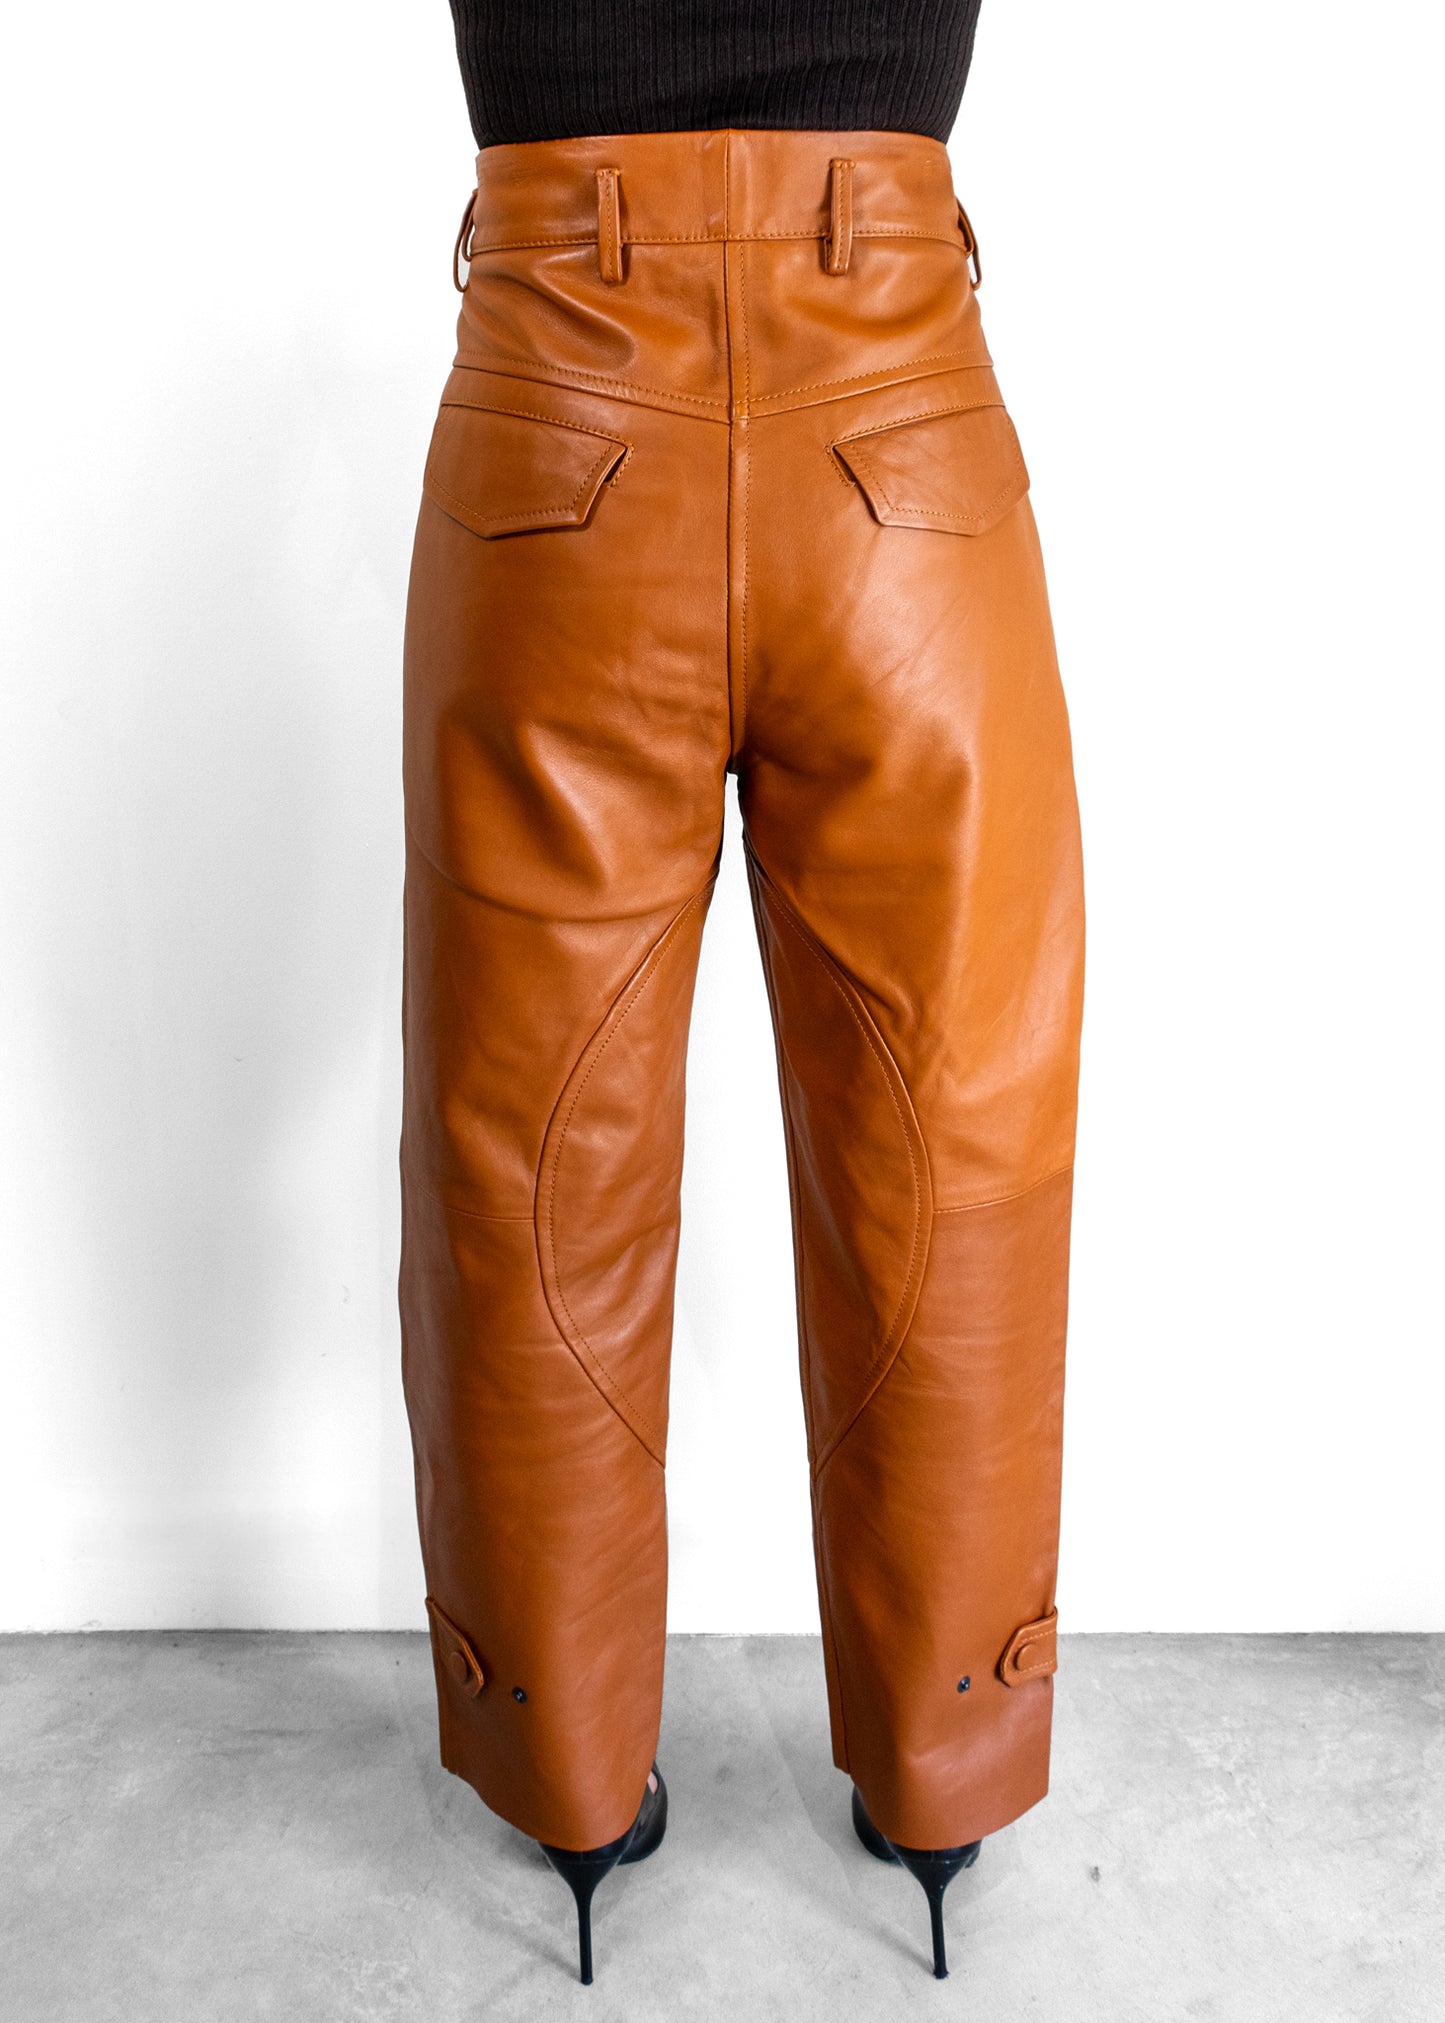 Petar Petrov High-rise Leather Trousers